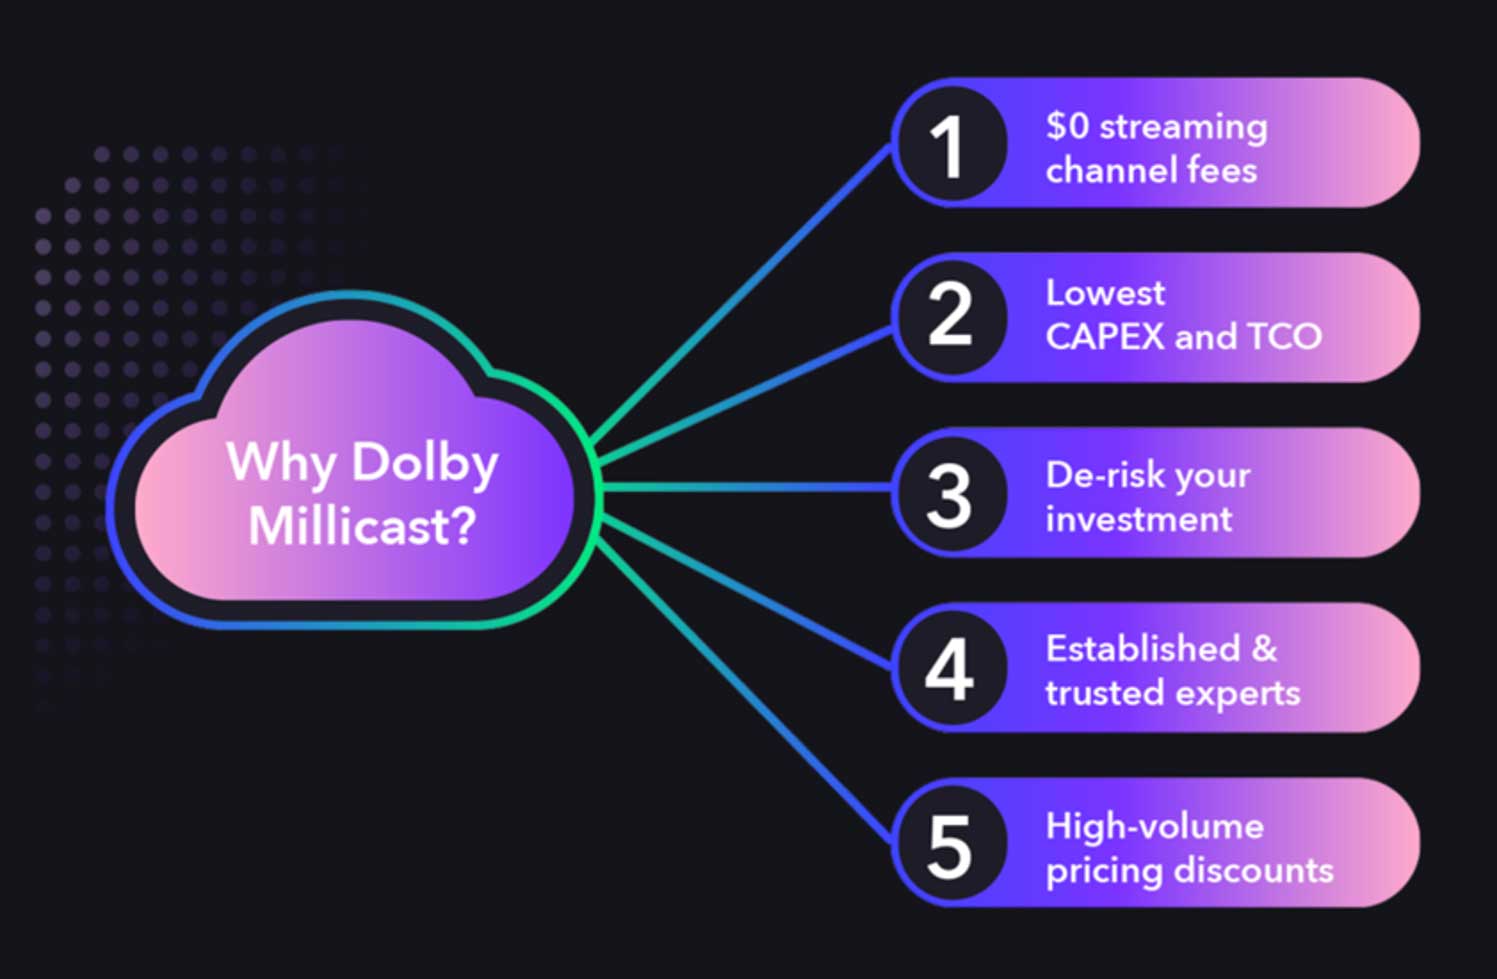 infographic depicting a cloud with "Why Dolby Millicast" with a list of reasons to choose Dolby Millicast, including: $0 streaming channel fees, lowest CAPEX and total cost of ownership, de-risk your investment, established and trusted experts, and high-volume price discounts